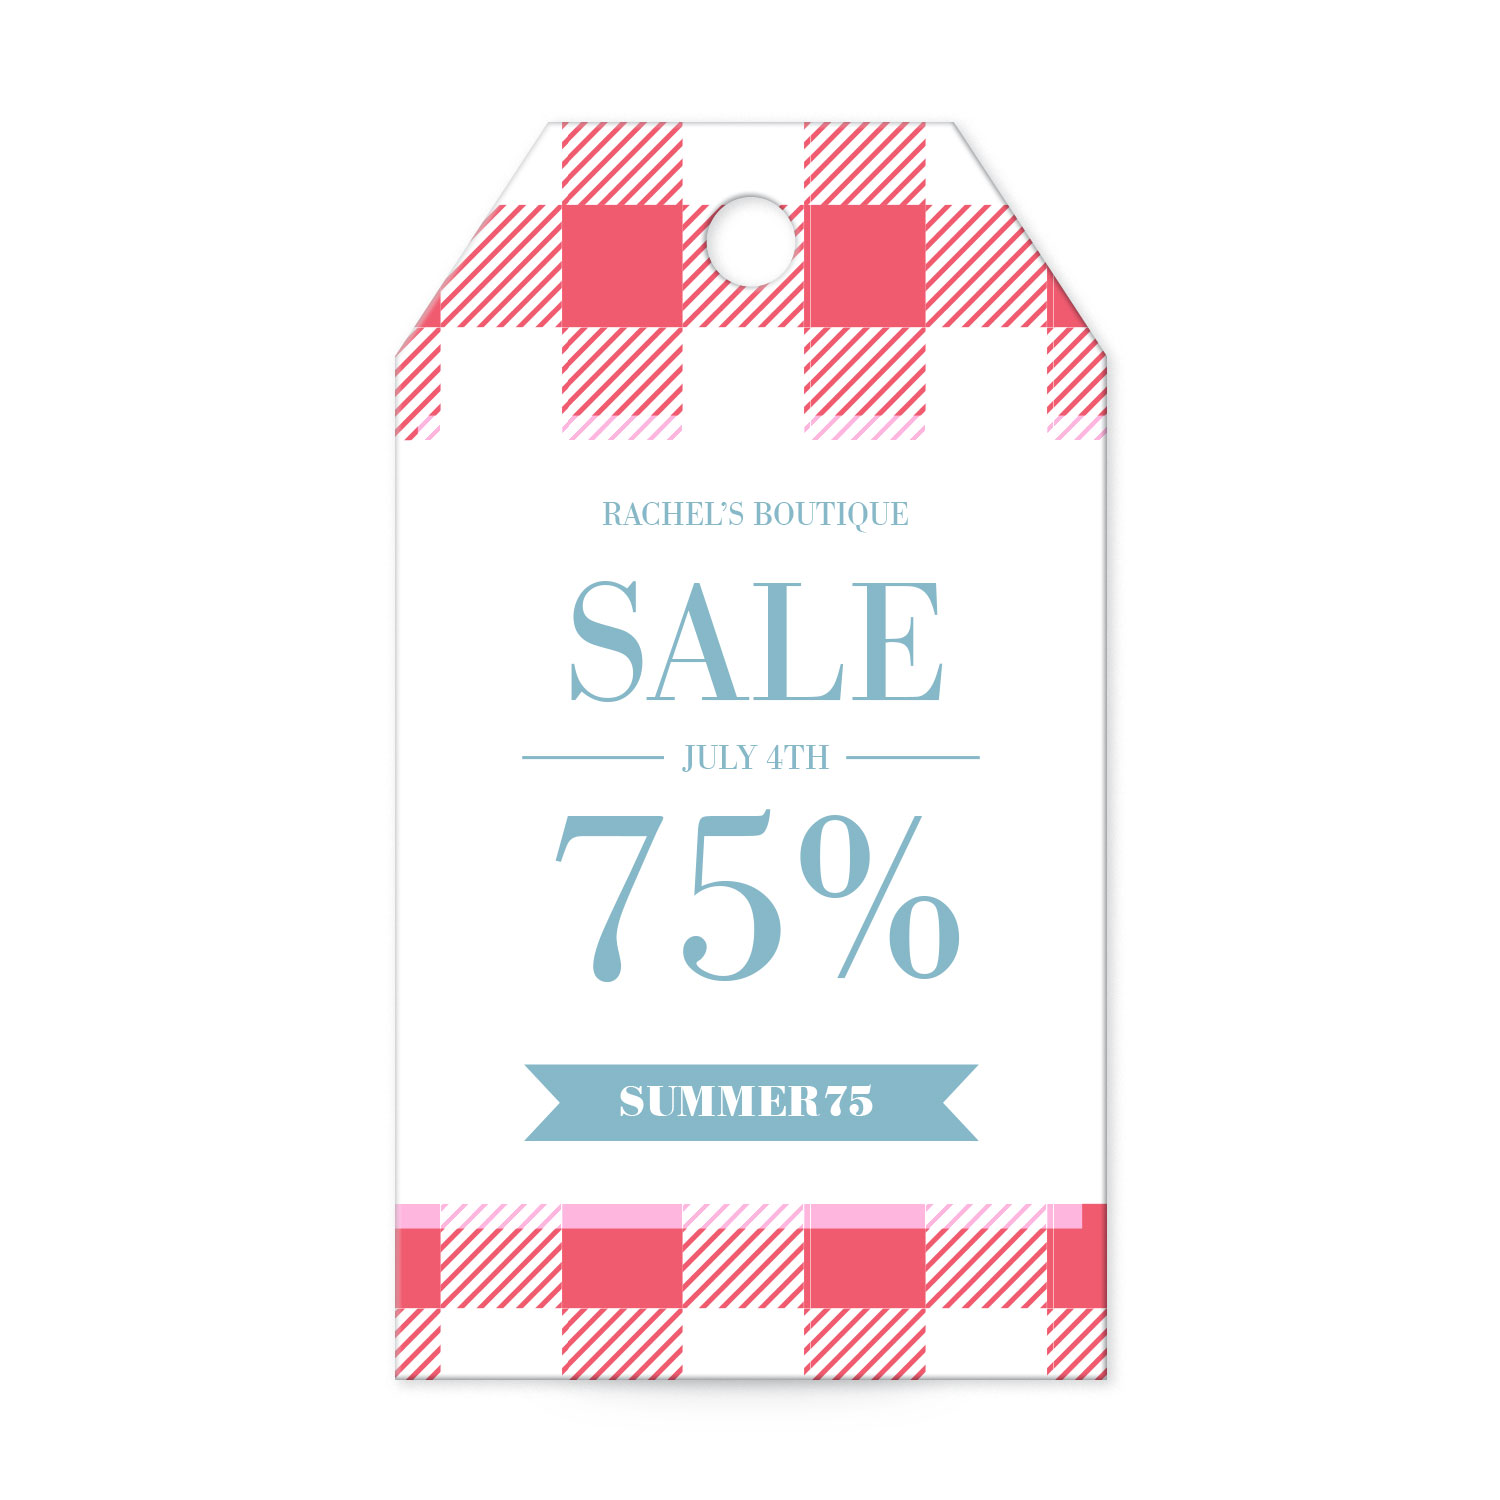 Gingham tablecloth print banner tag templates